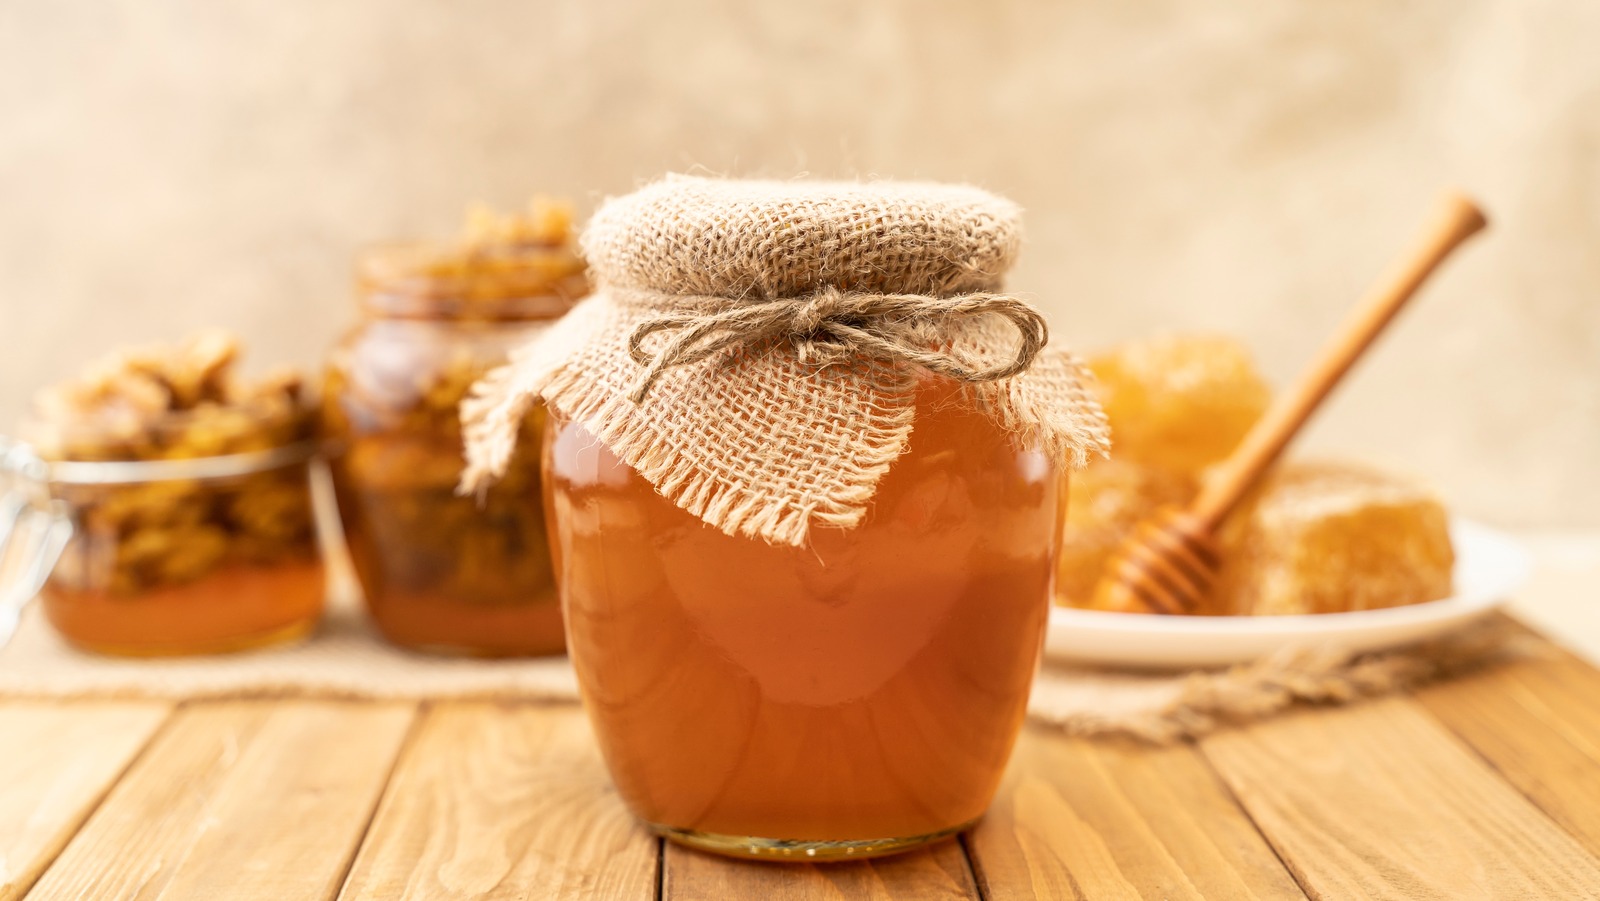 New Study Examines The Role Honey Could Play In Treating Alzheimer's